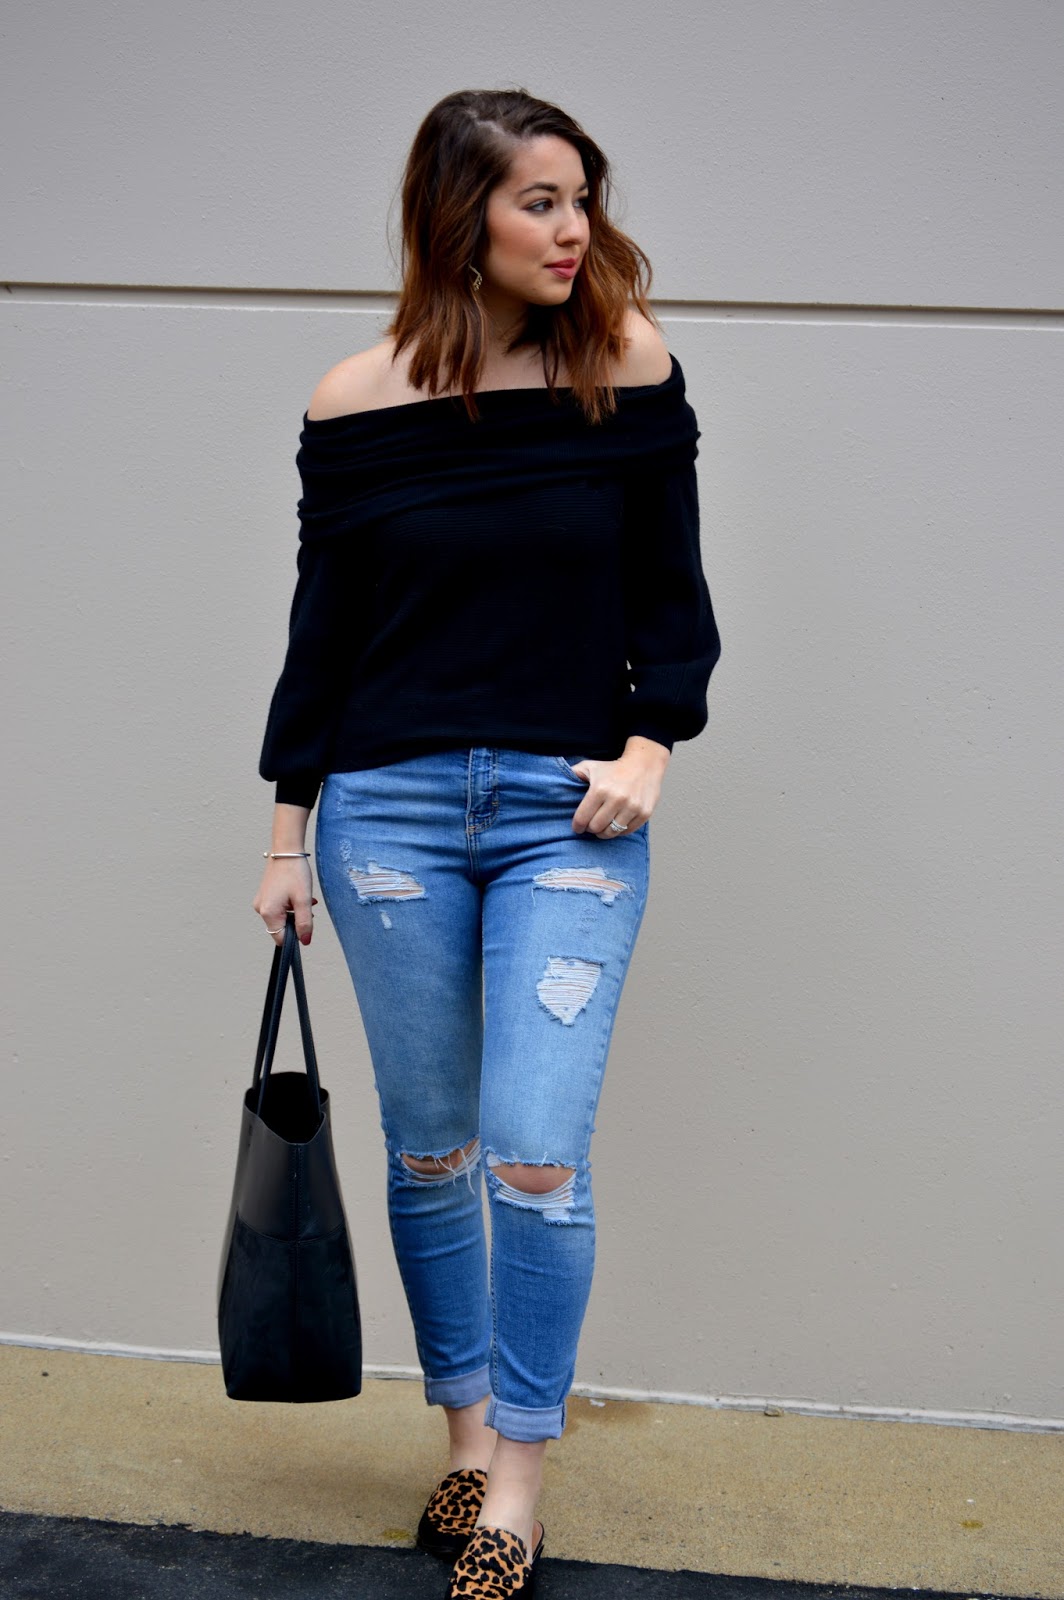 Rosy Outlook: Bare Shoulders in Winter + FF Link-Up!